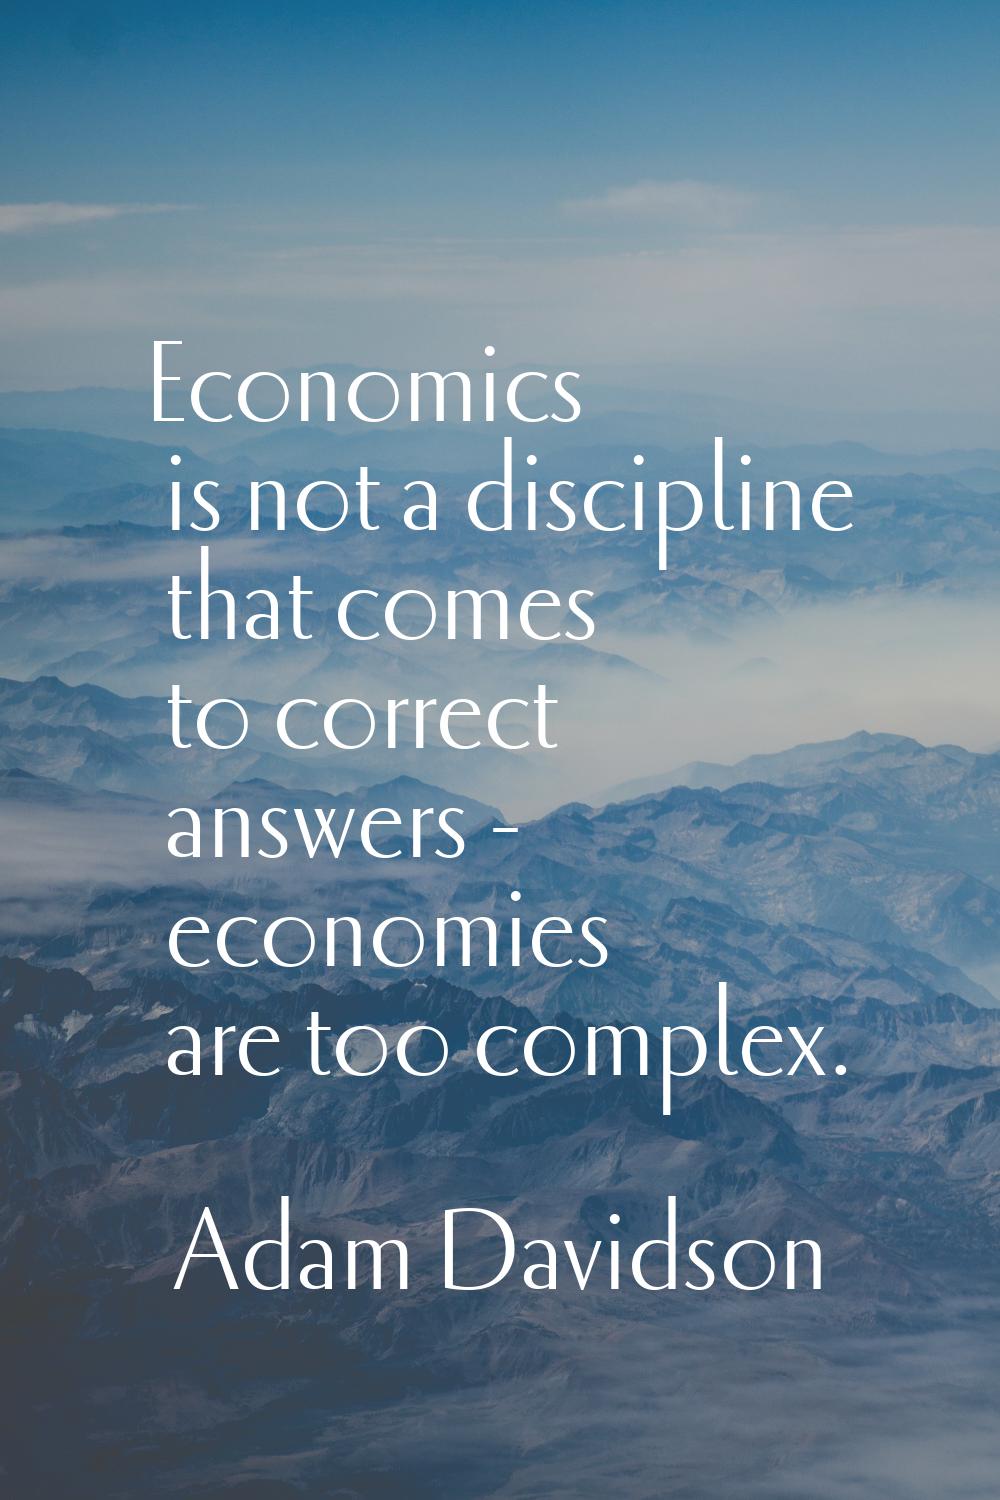 Economics is not a discipline that comes to correct answers - economies are too complex.